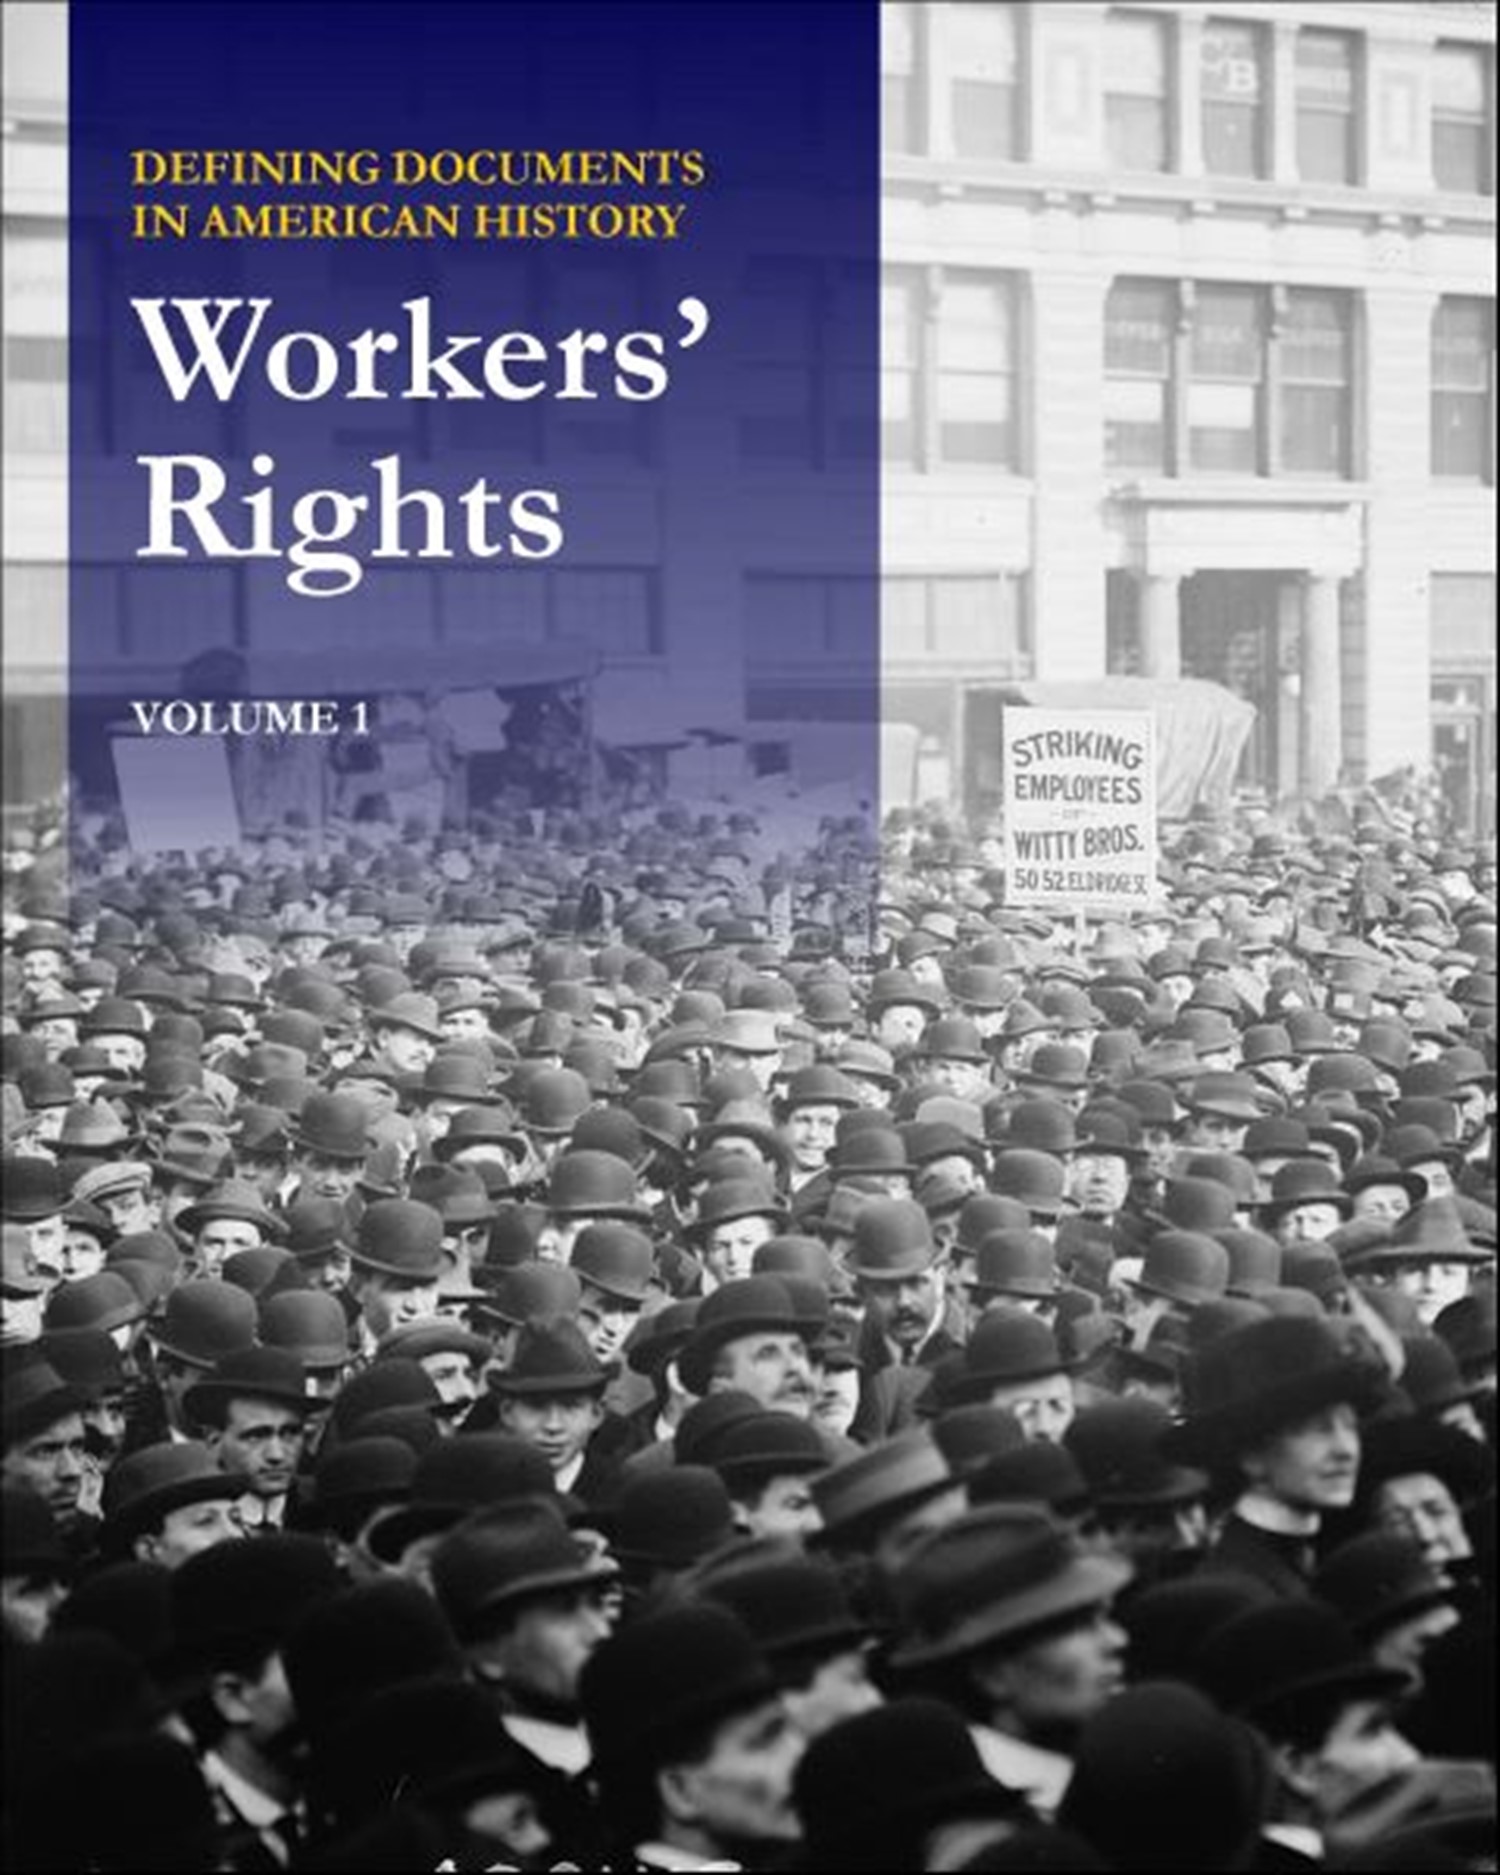 Defining Documents in American History: Workers’ Rights